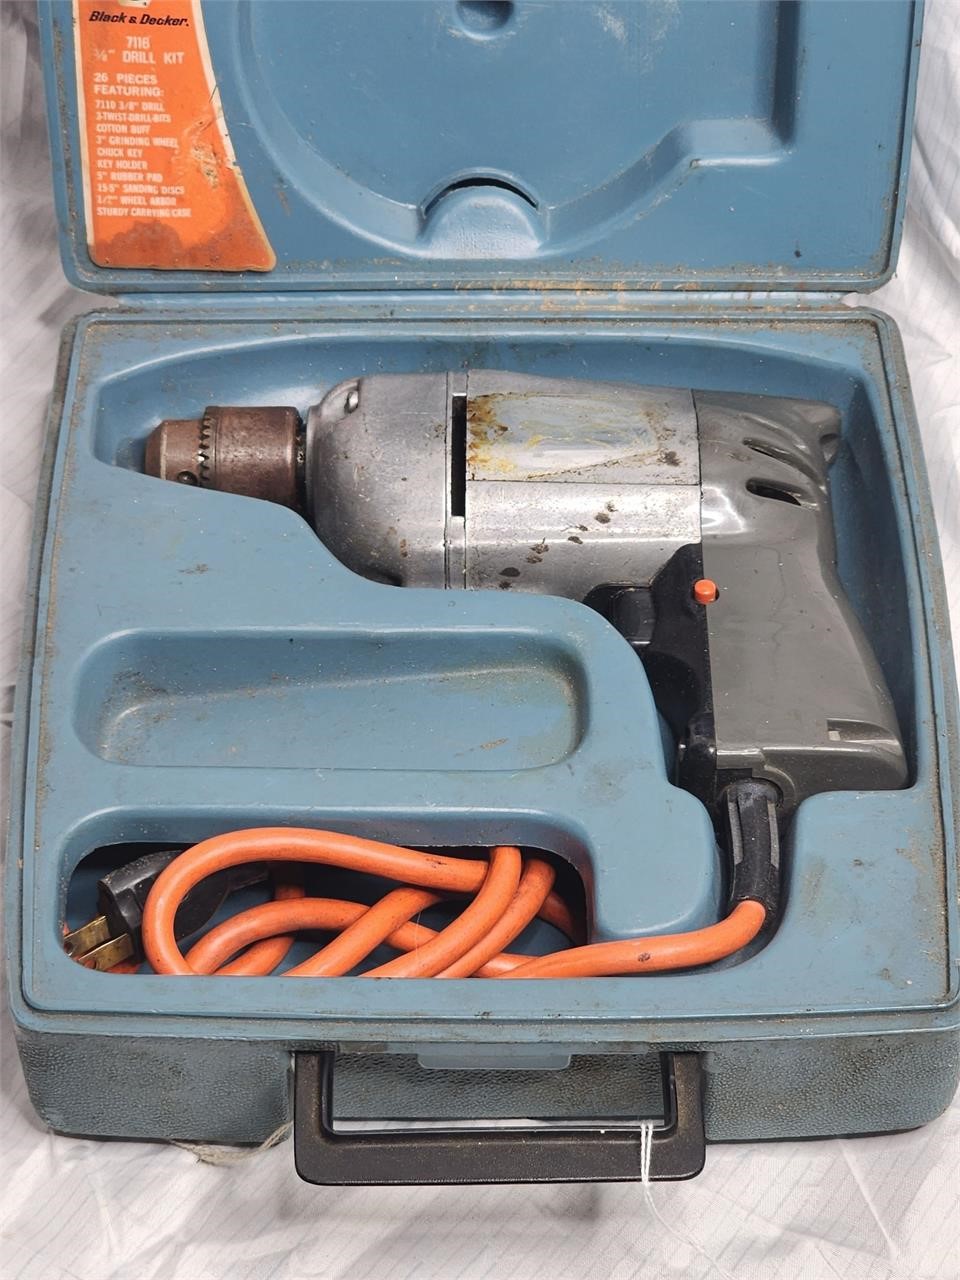 Vintage Black and Decker Drill and Case